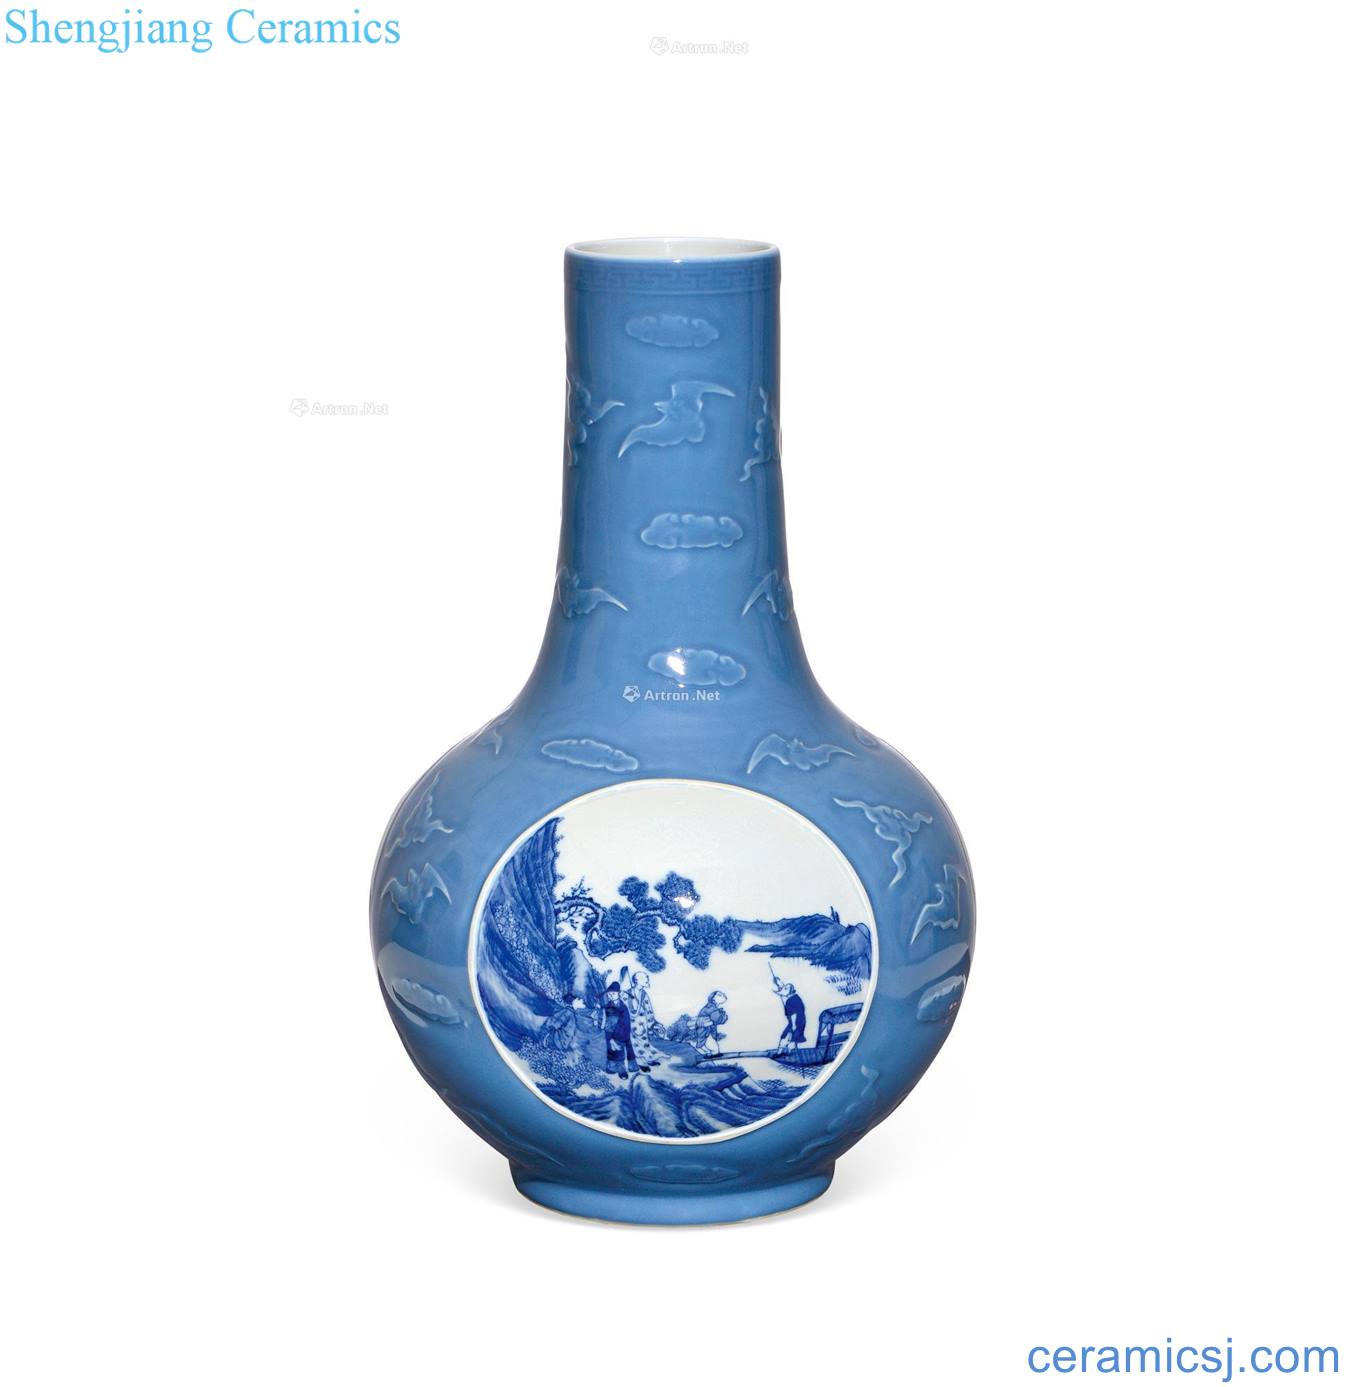 Clear sky blue glaze blue and white landscape character tree medallion